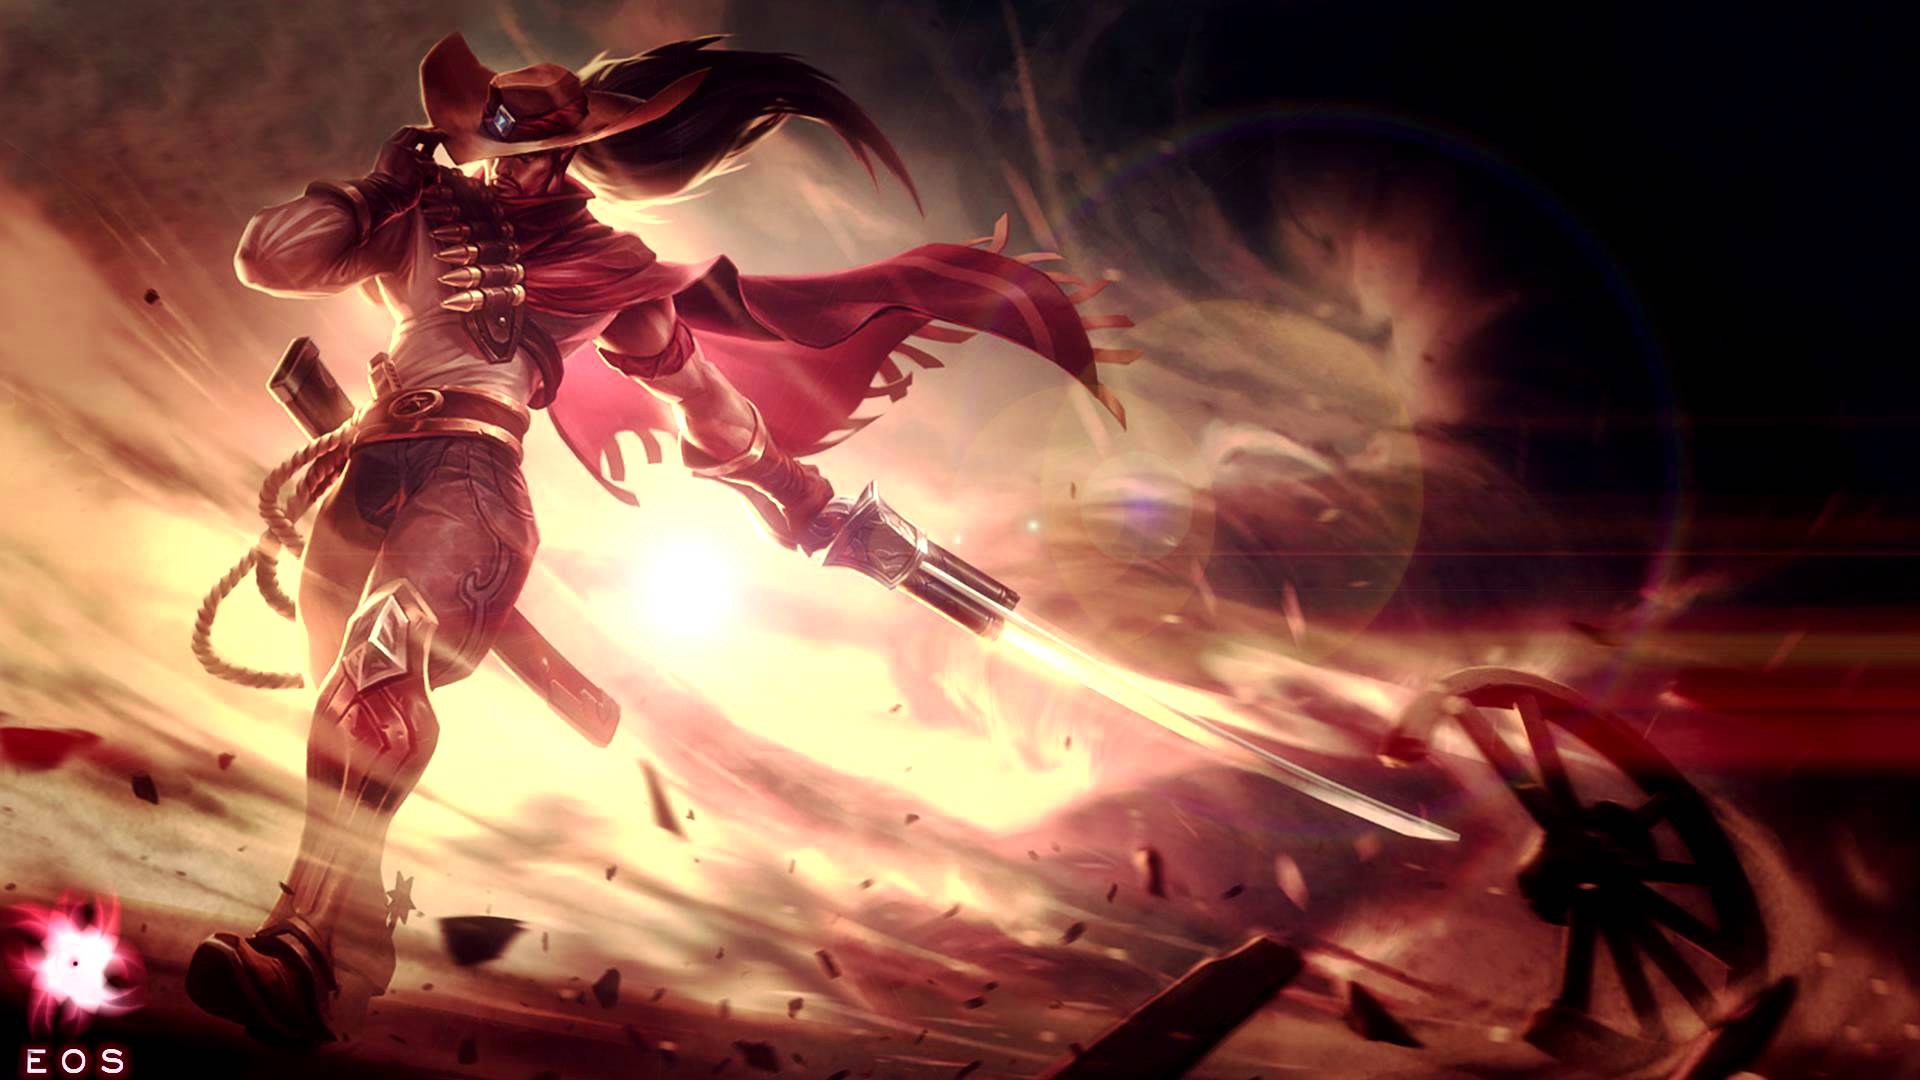 Free Download League Of Legends Background Yasuo 1920x1080 Wallpaper Teahubio [1920x1080] For